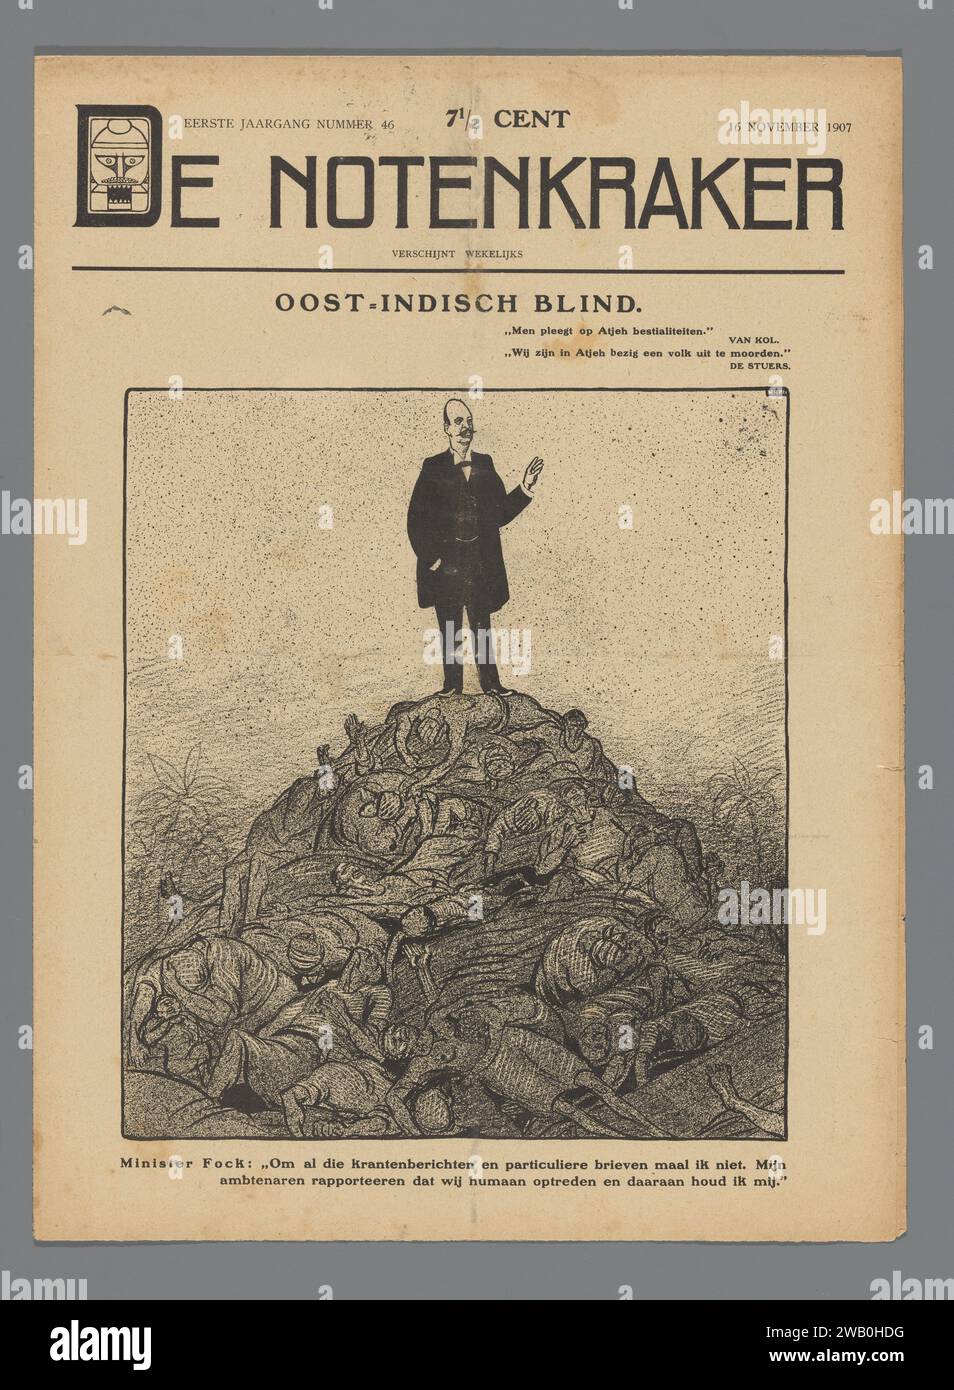 De Notenkraker, November 16, 1907 / East Indian Blind, Albert Hahn (I), 1907 magazine. print Episode of the satirical magazine De Notenkraker of 16 November 1907, first volume, number 46. Cover with illustration by Minister of Coloniën Dirk Fock standing on a mountain of bodies of murdered inhabitants of Aceh, during the Aceh War. Part of a full first volume (1907). Each number contains 8 pages, partly not yet cut, with a cartoon of Albert Hahn on the front, on the other pages of Hahn always between the text. In the letter 'D' of the title, a head of a so -called nutcracker is depicted. print Stock Photo